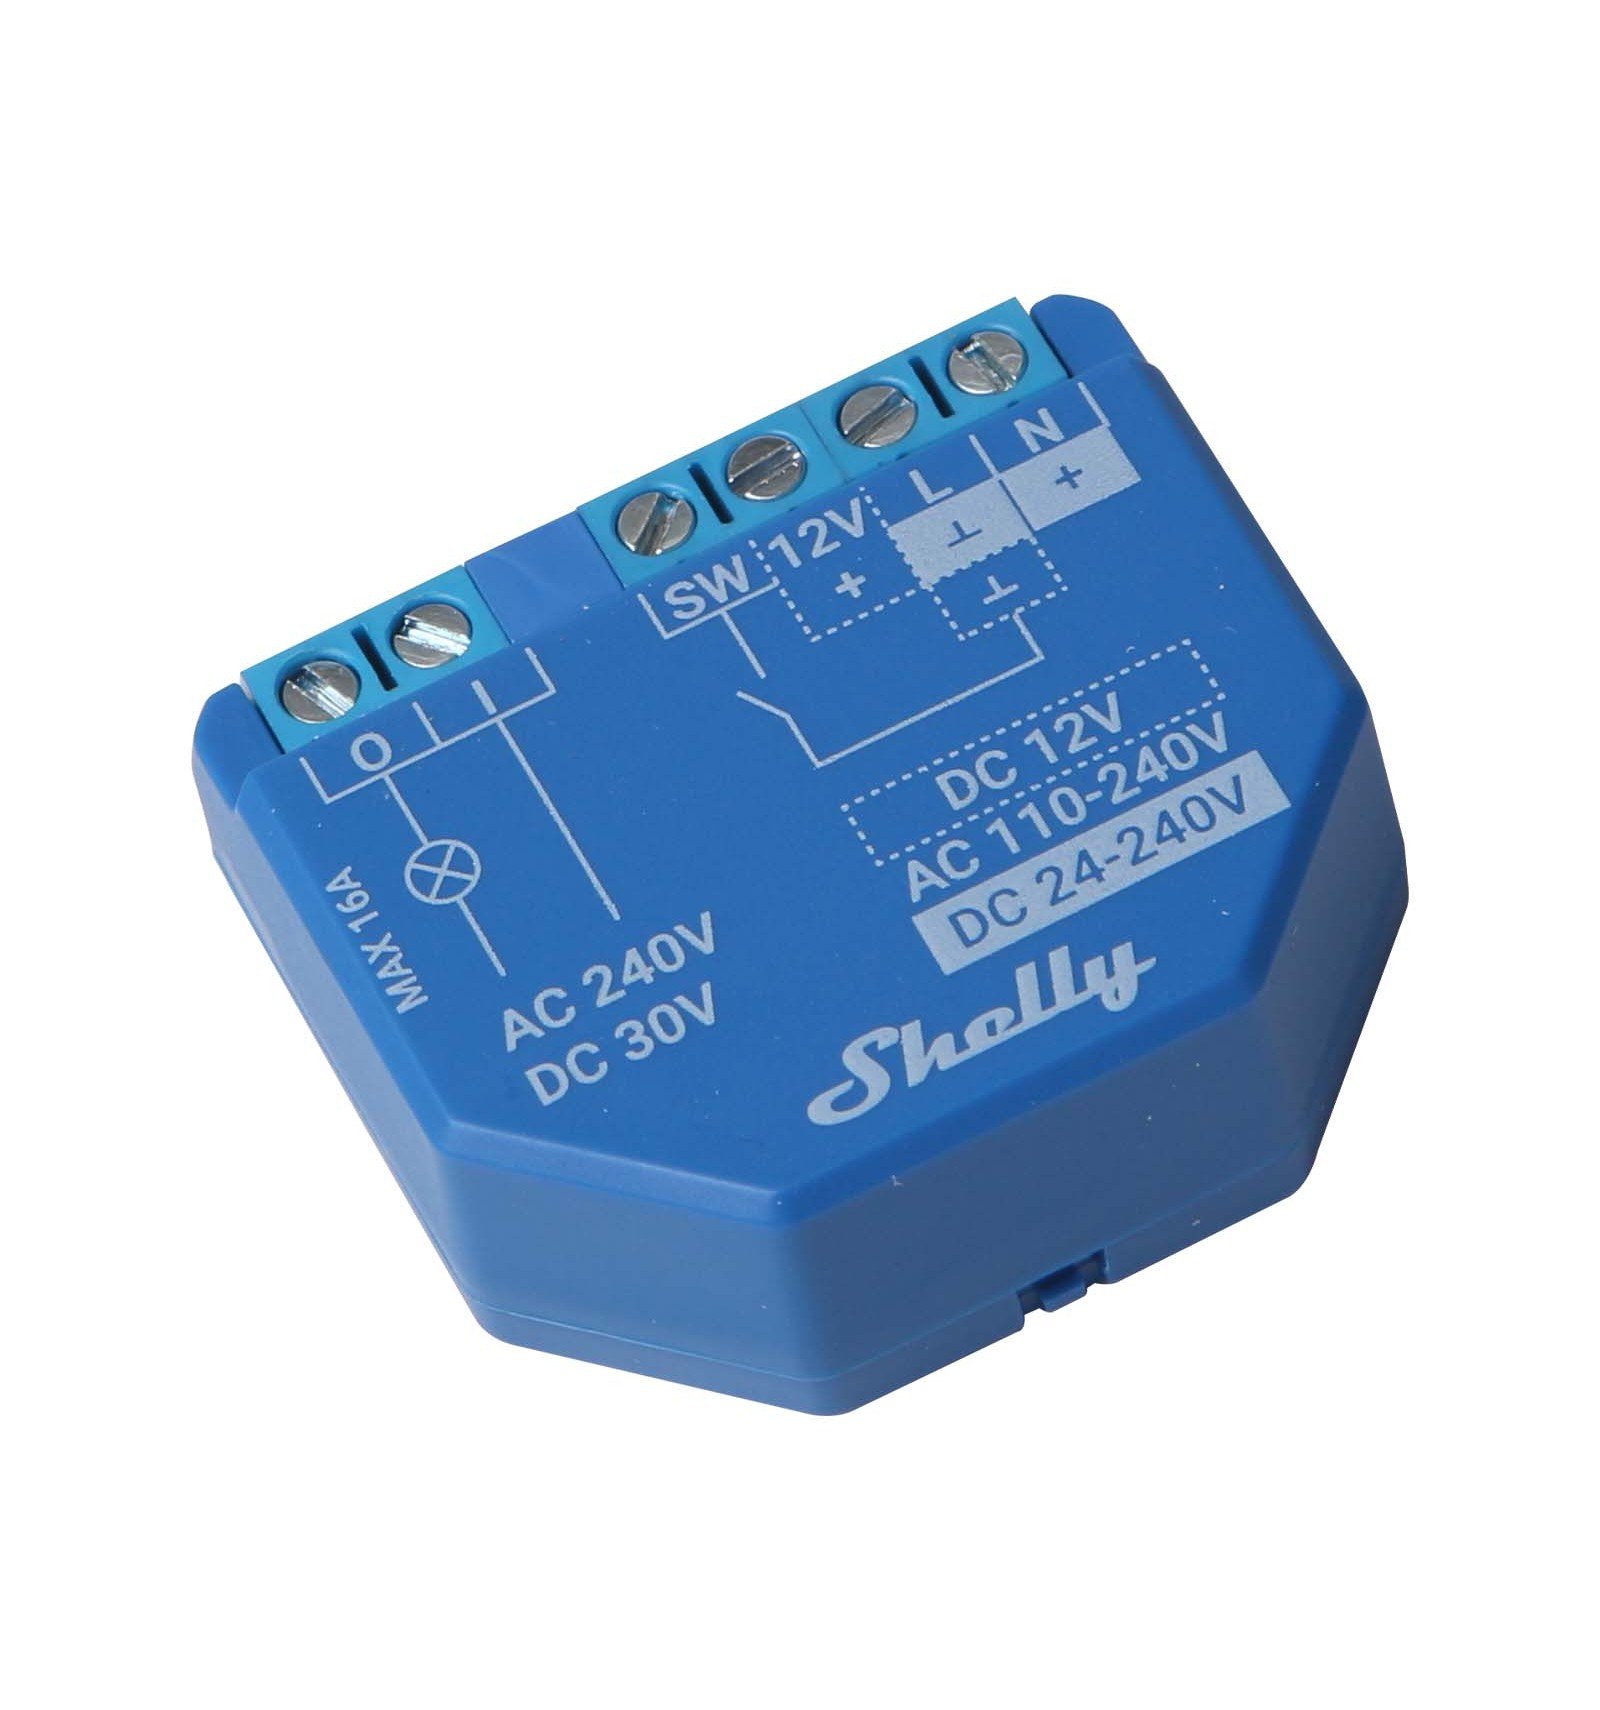 Shelly Plus 1 UL certified. Wi-Fi operated smart relay switch, 1